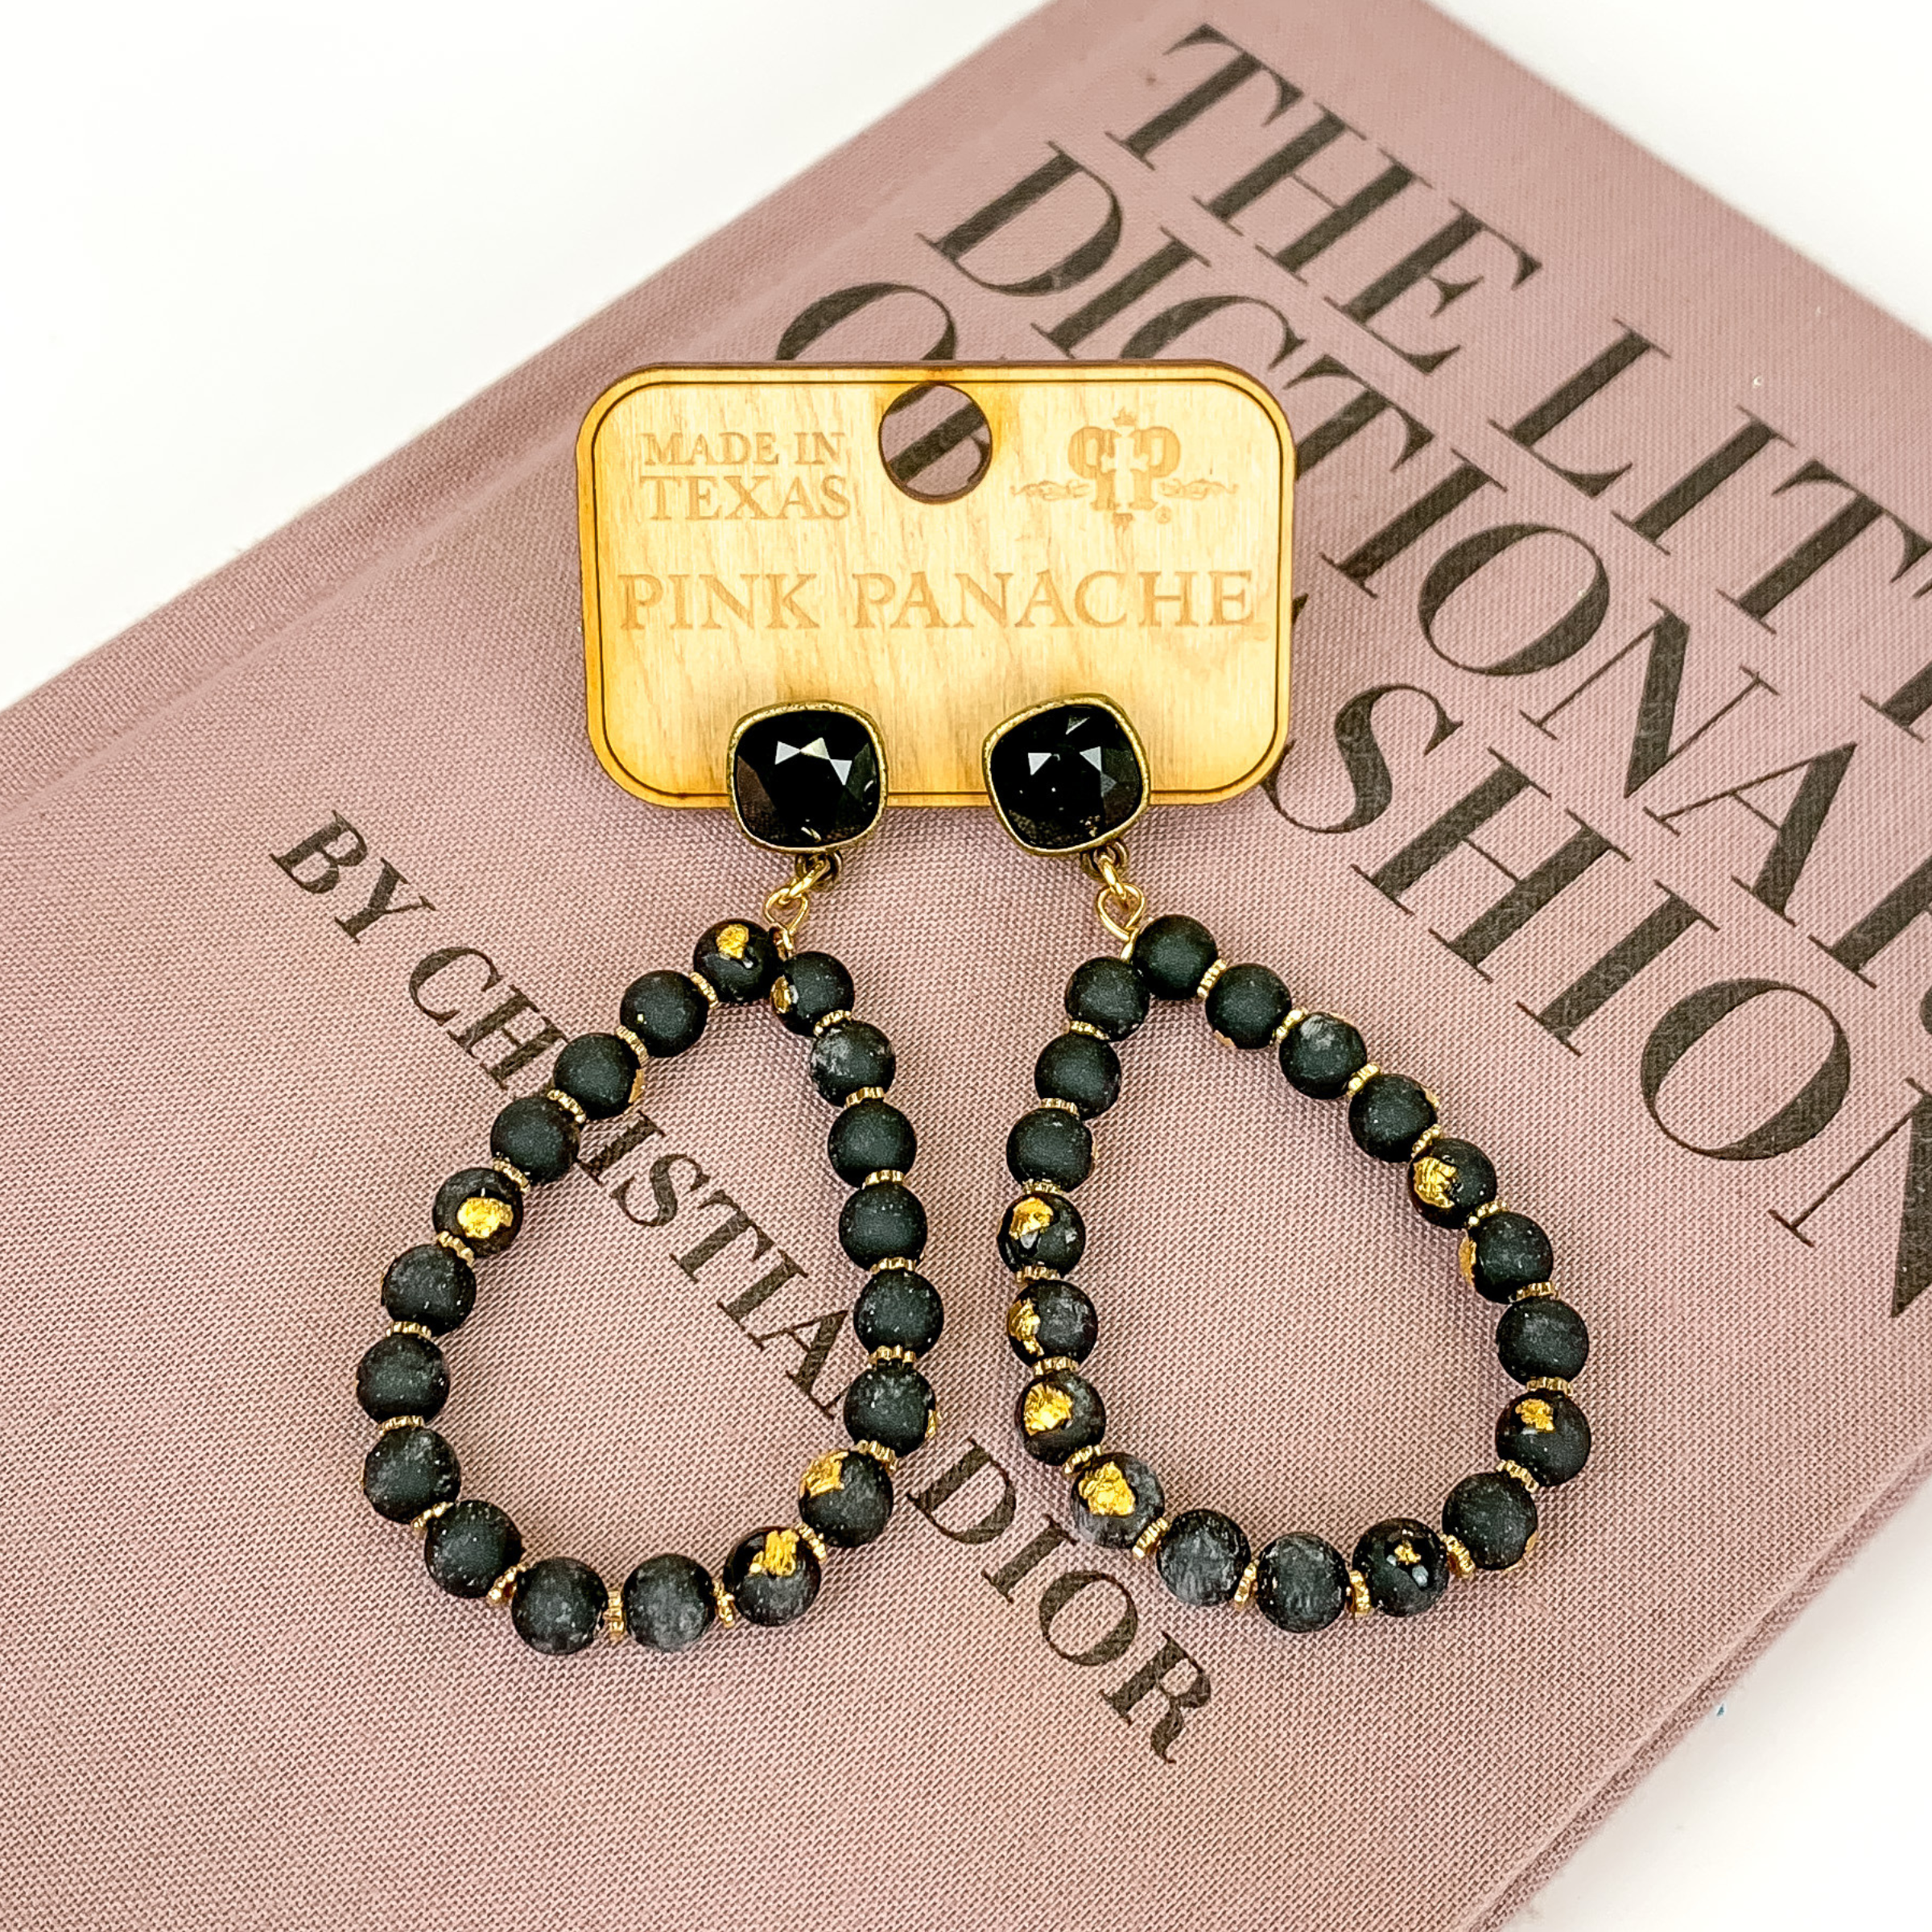 Black square stud earrings with a black beaded teardrop pendant. The pendant includes gold disk bead spacers and gold flakes on the beads. These earrings are pictured on a white background with a gold chain behind the earrings. 